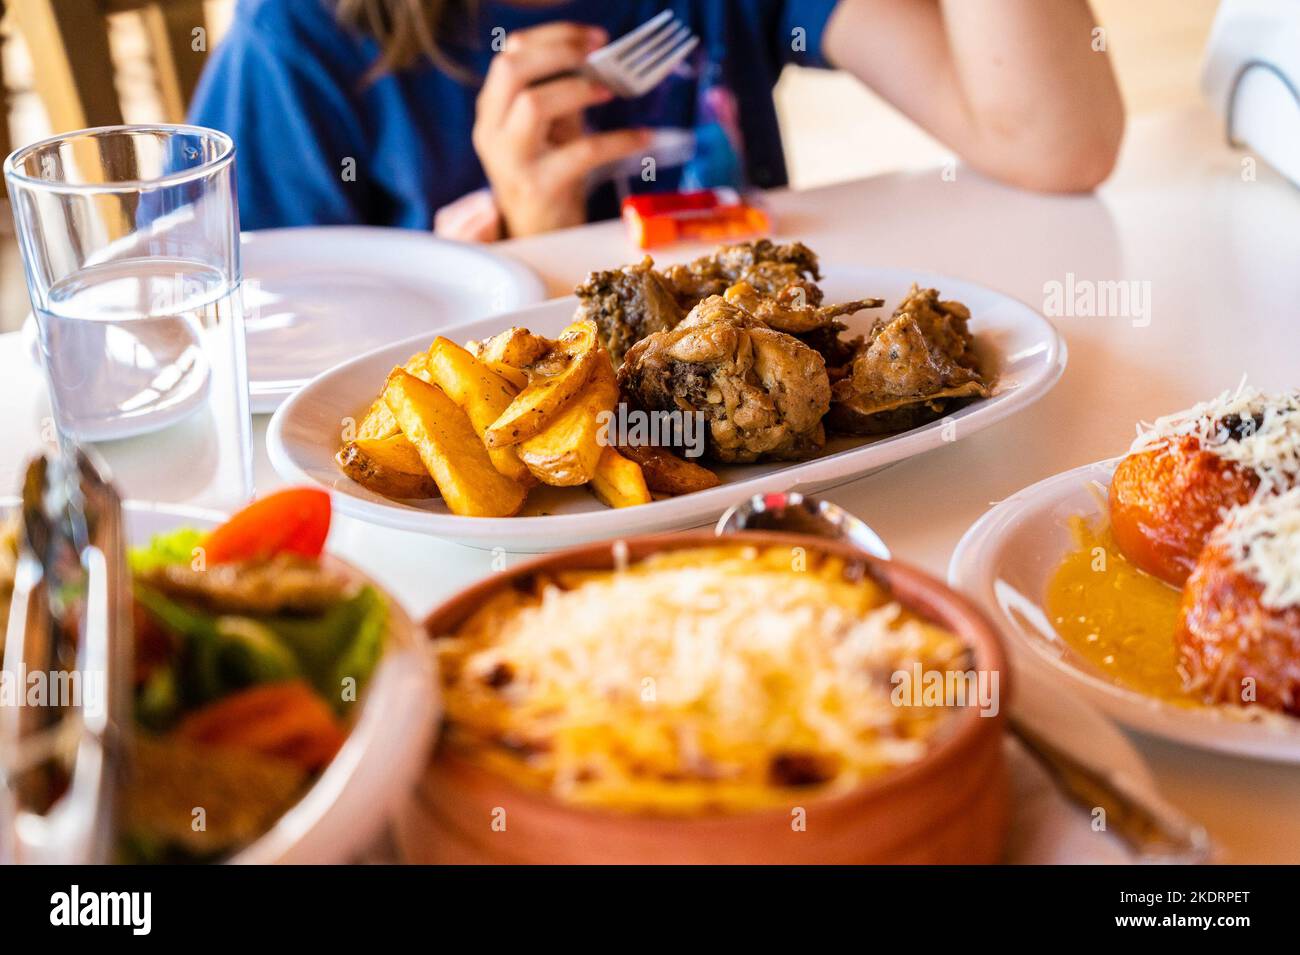 Family eating traditional Greek food in restaurant tavern in Greece. Traditionally served greek food in a greek tavern on authentic dinner tables and Stock Photo